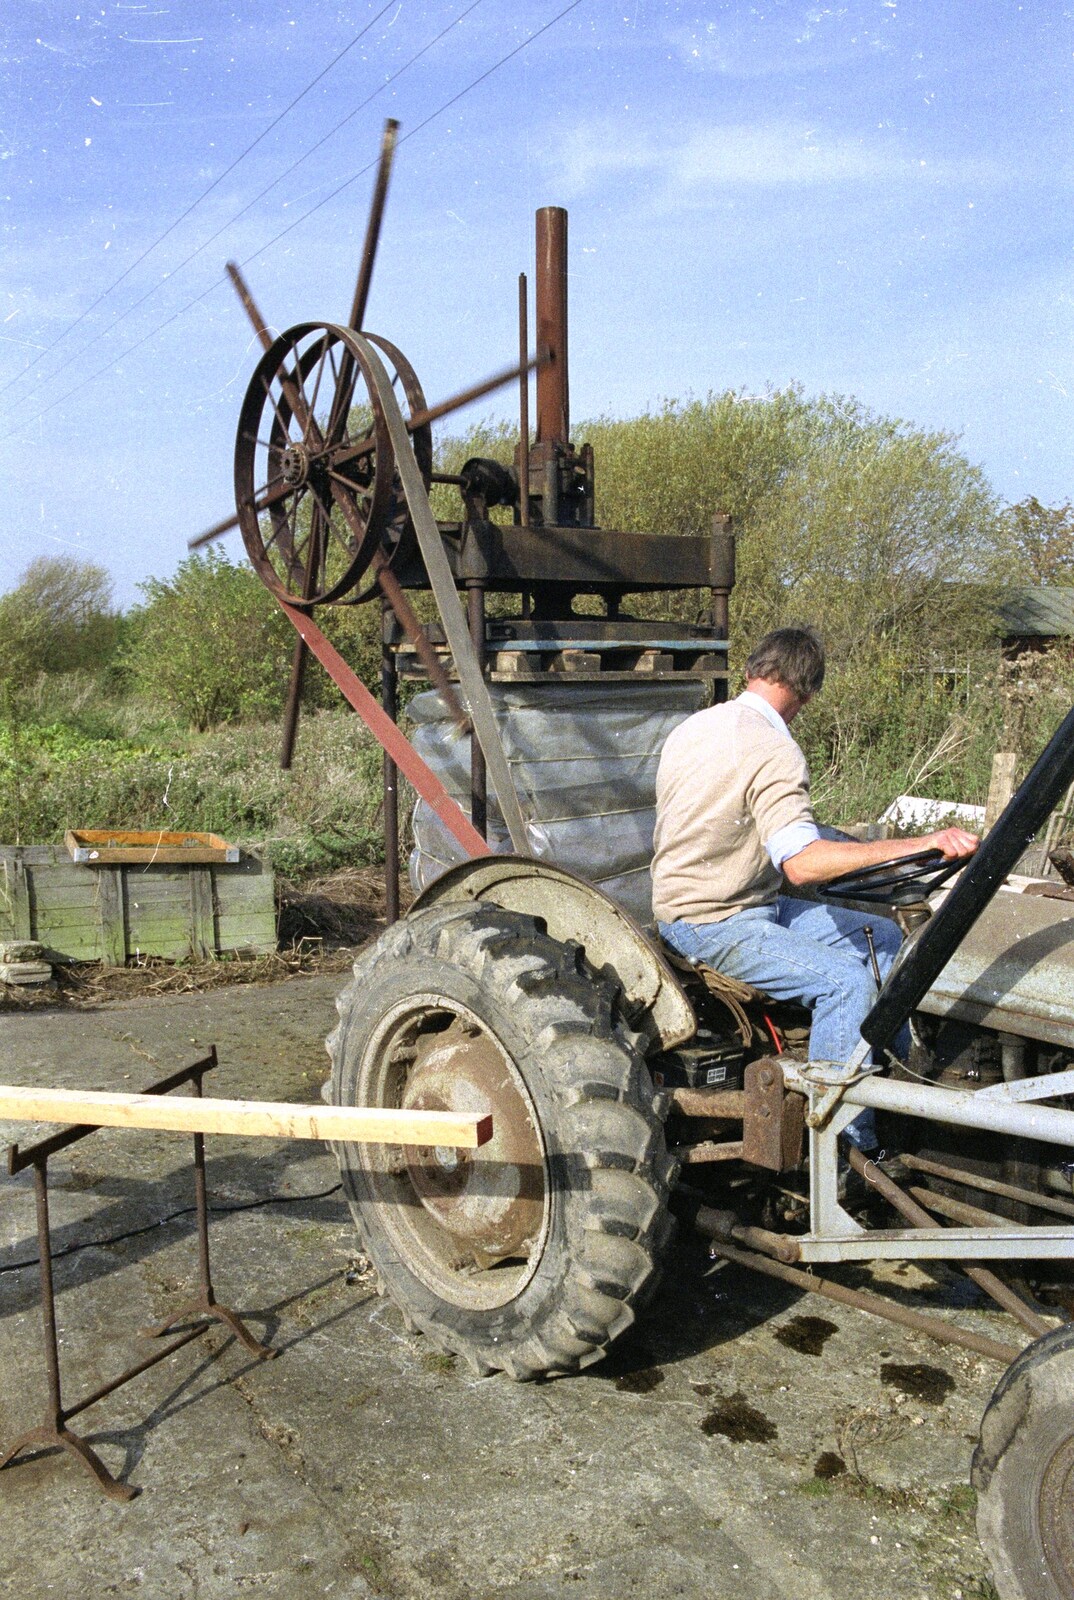 Geoff spins up the press from The Annual Cider Making Event, Stuston, Suffolk - 11th October 1990